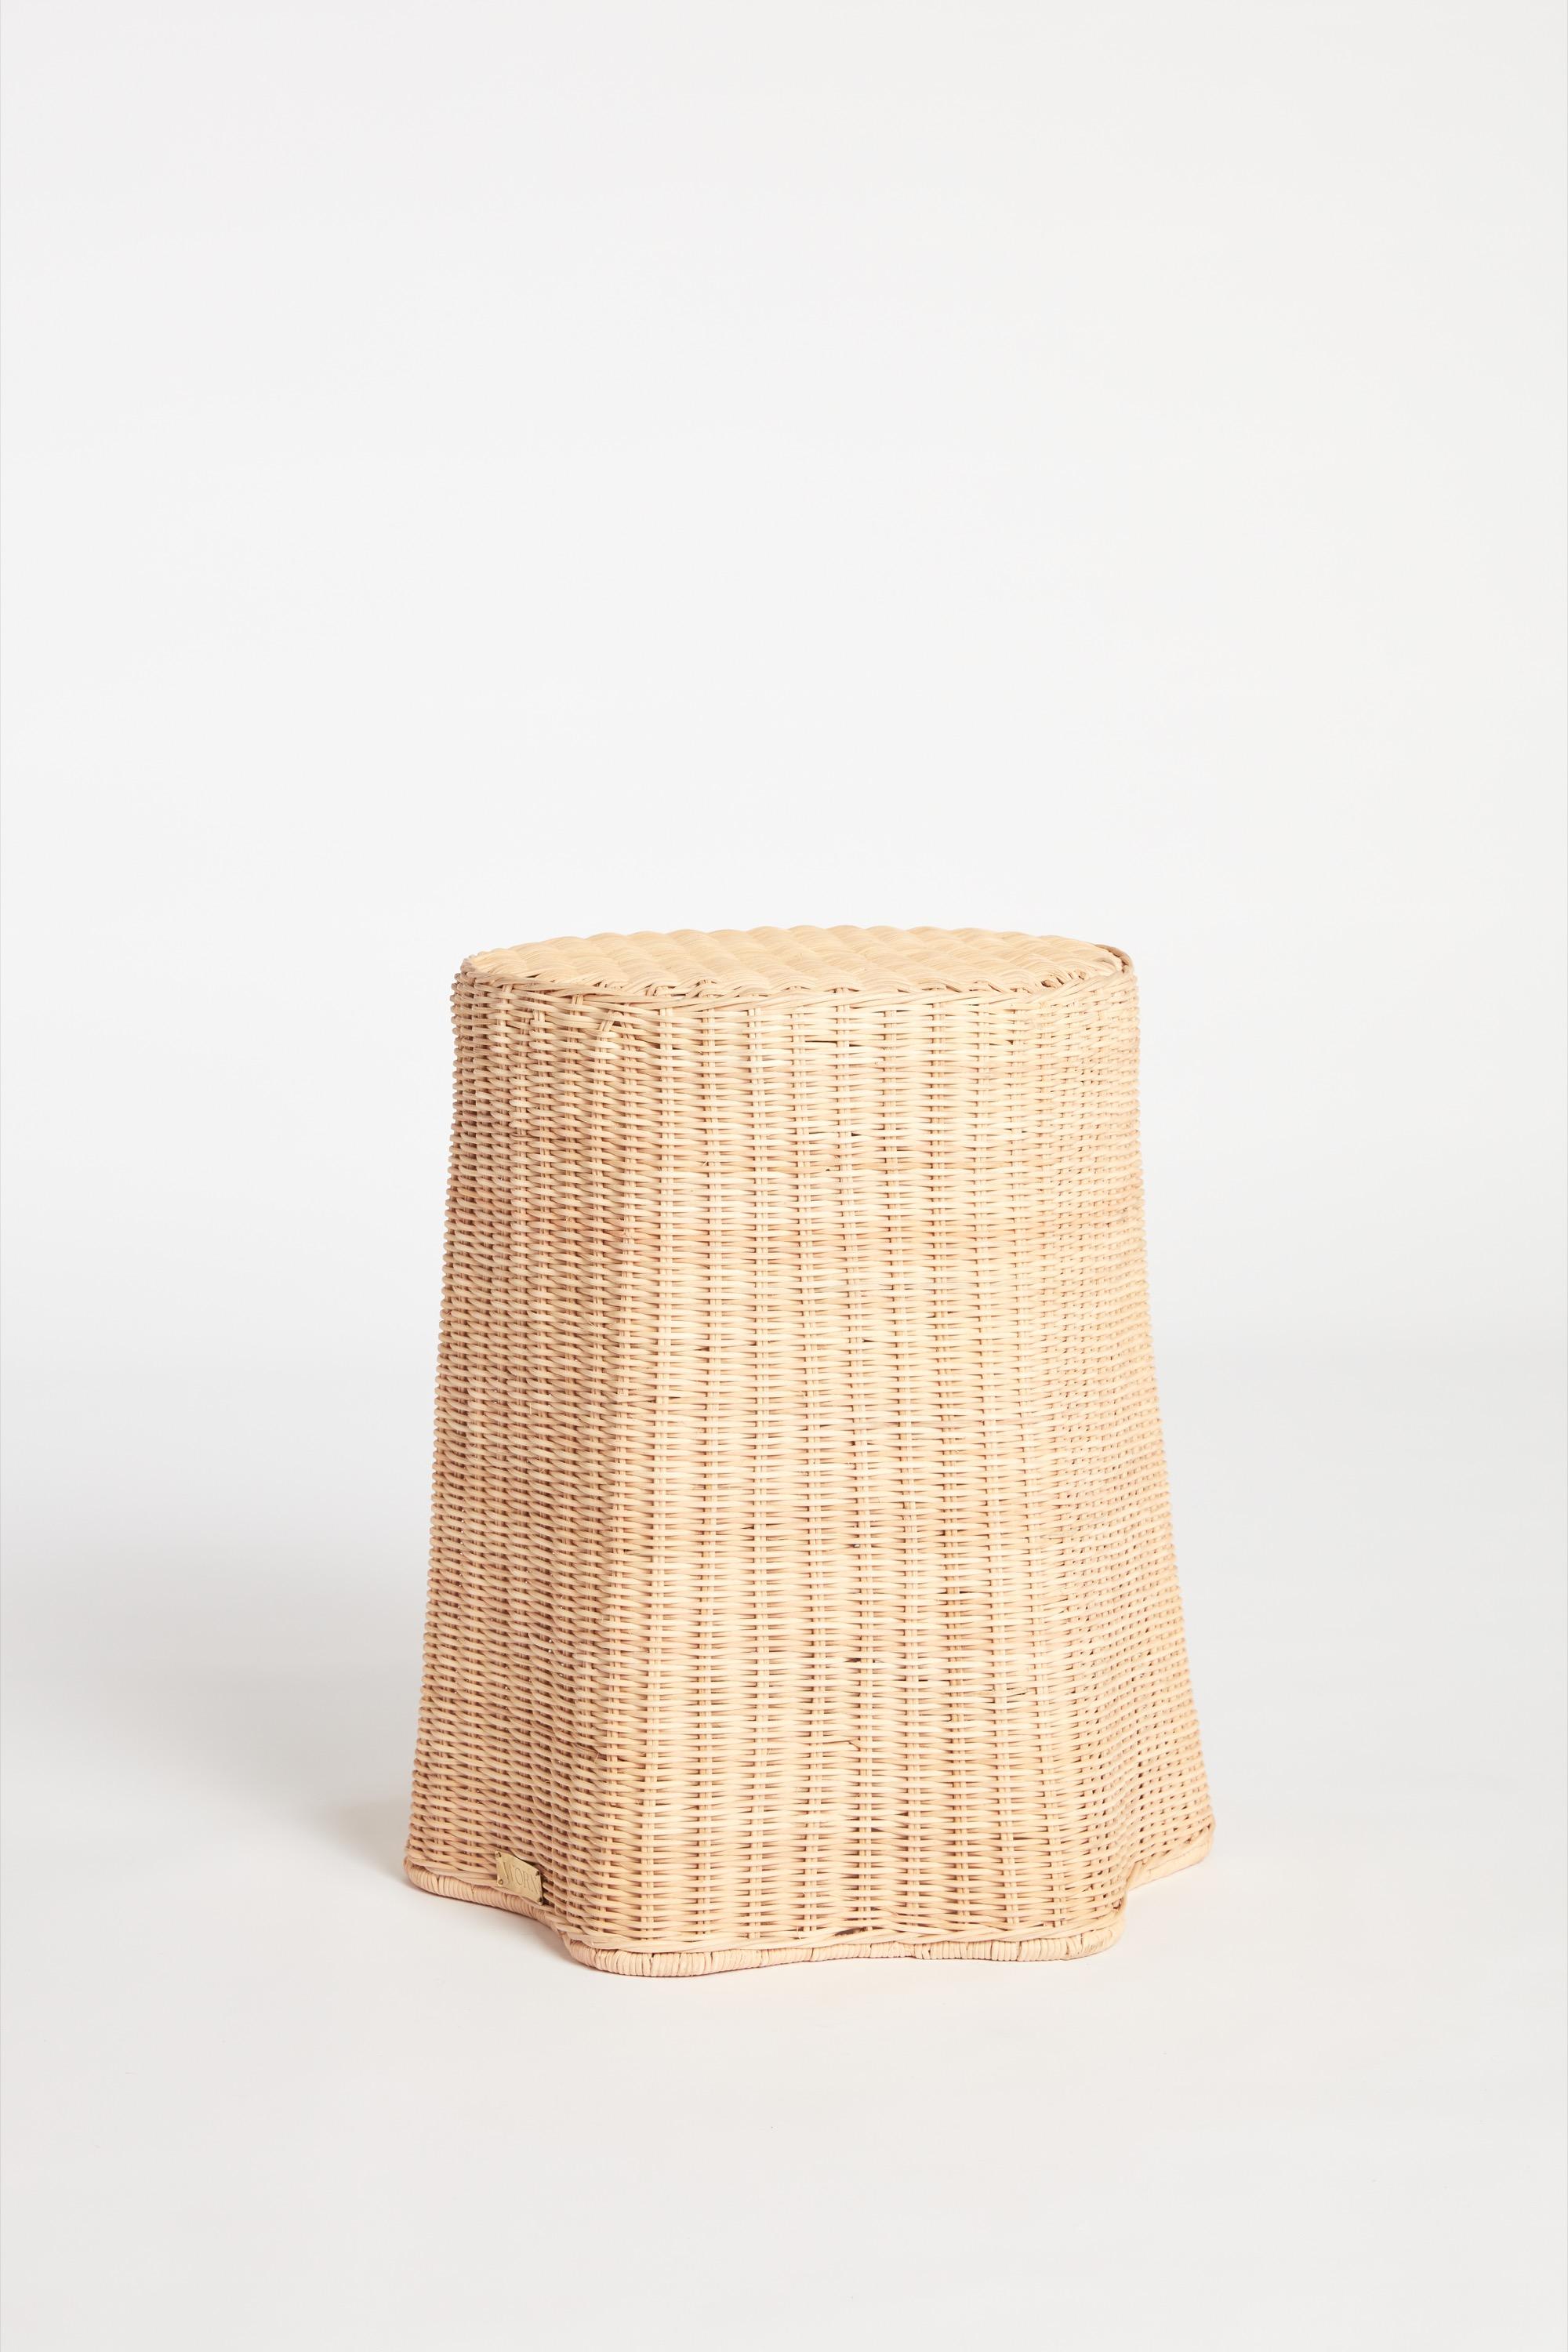 The sustainably made and handwoven side table is designed for the multiple purposes of bedside or lounge side table, and is a light weight-bearing stool (can hold up to 70kgs) serving form and function.

Working from a sturdy powder-coated steel